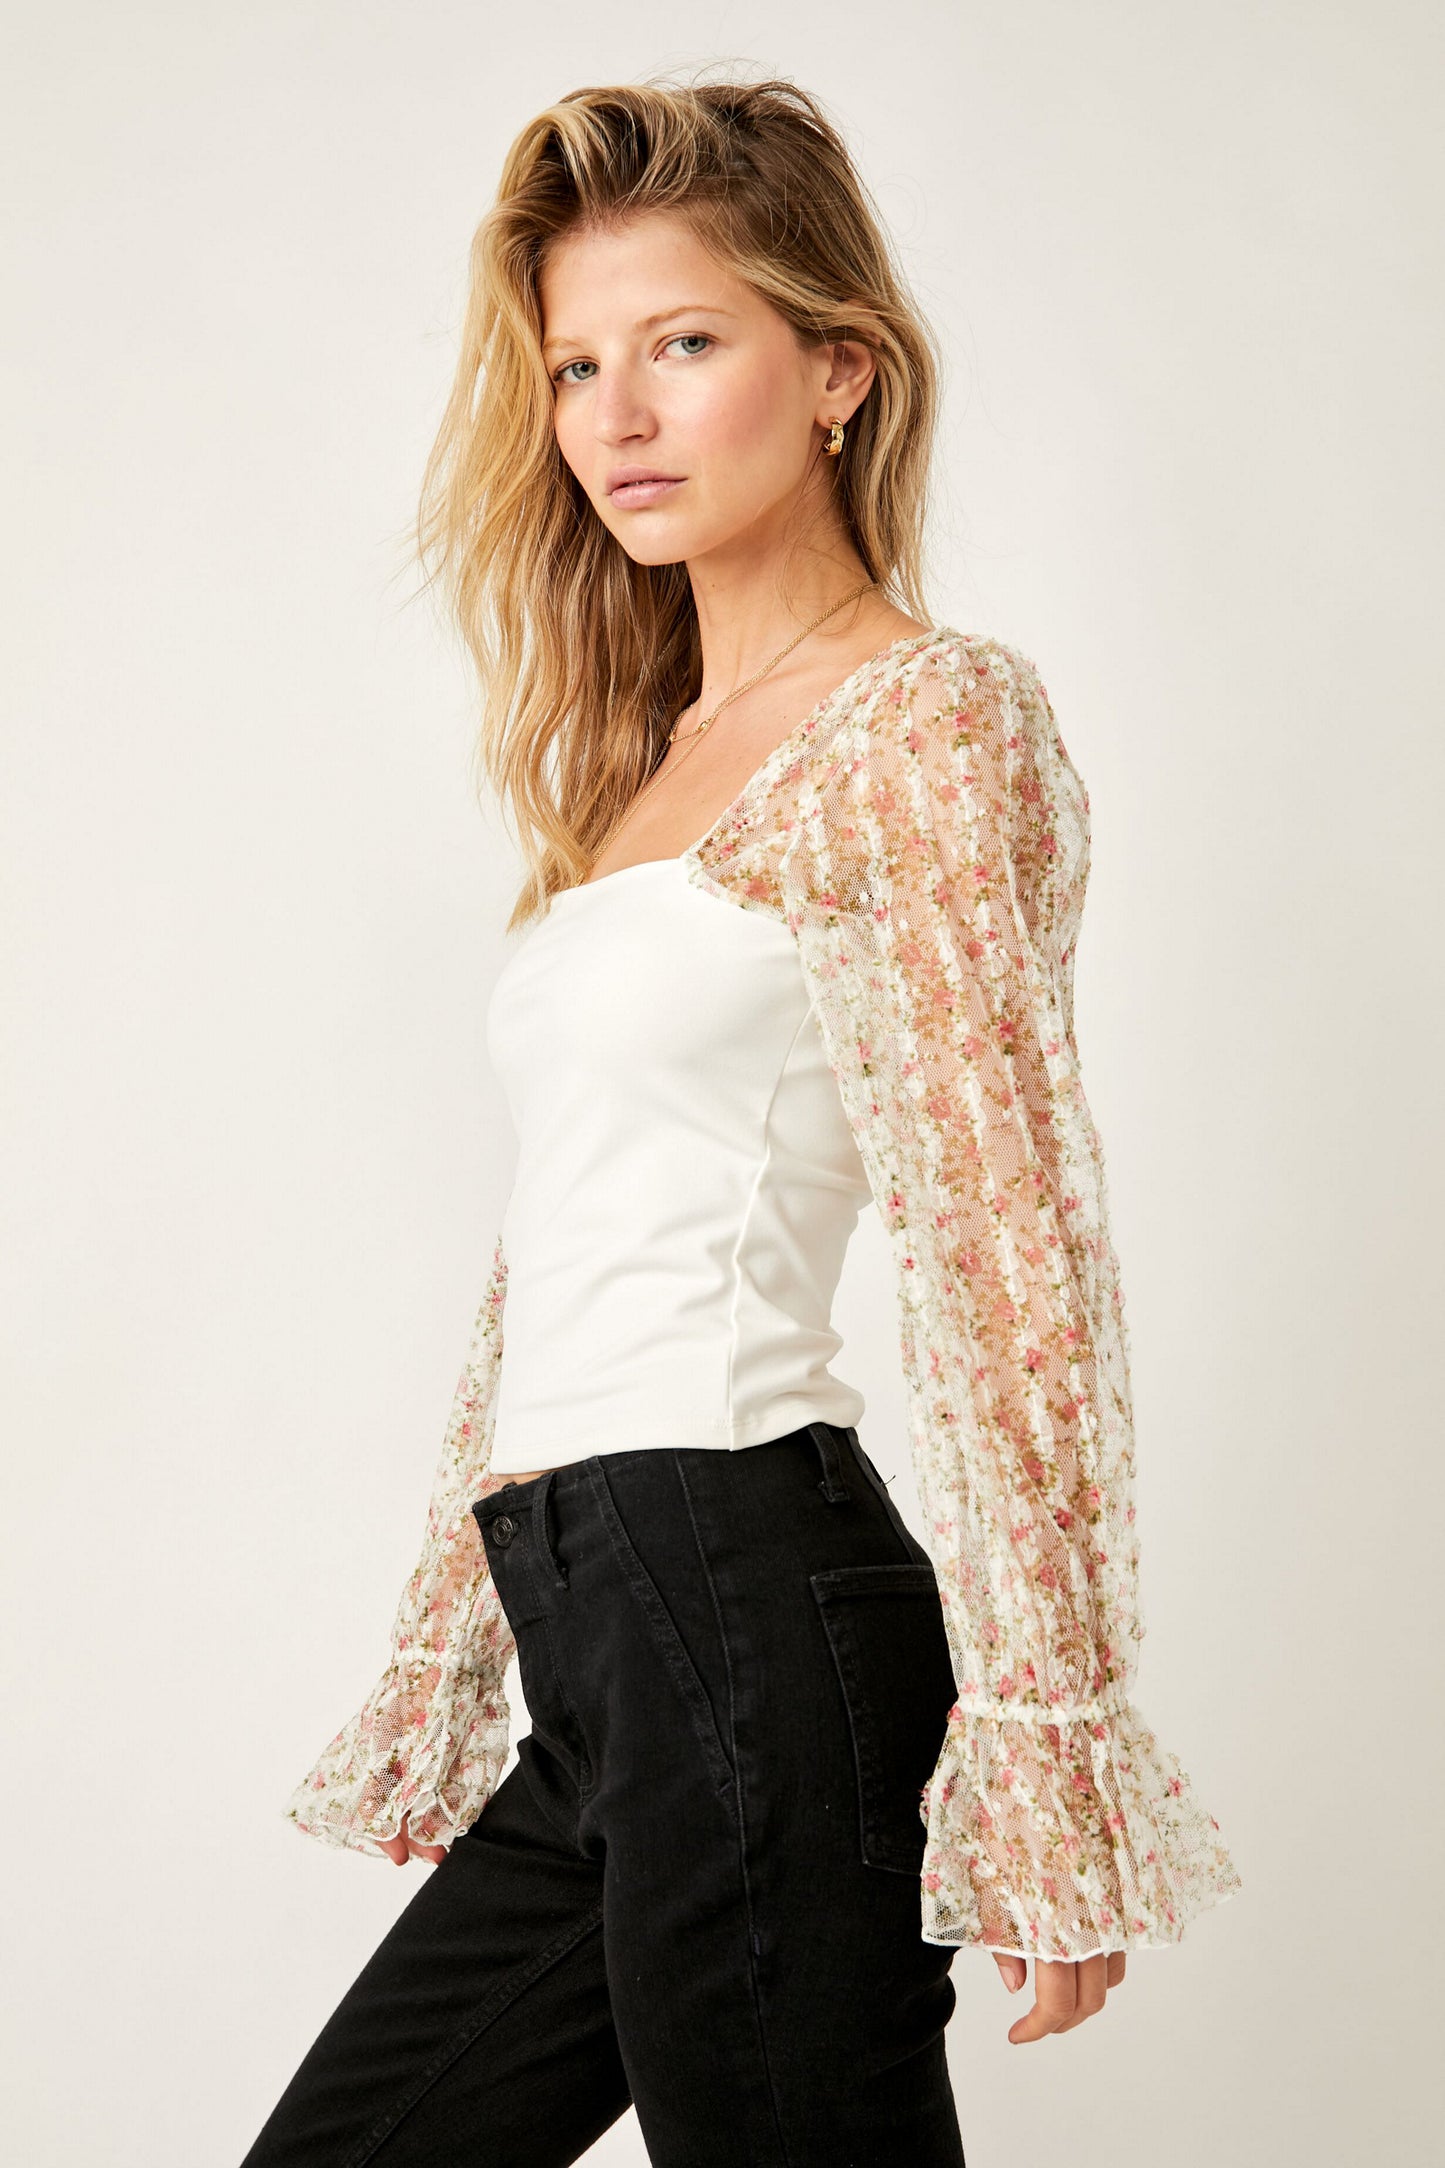 Give Me Butterflies L/S Top - FreePeople